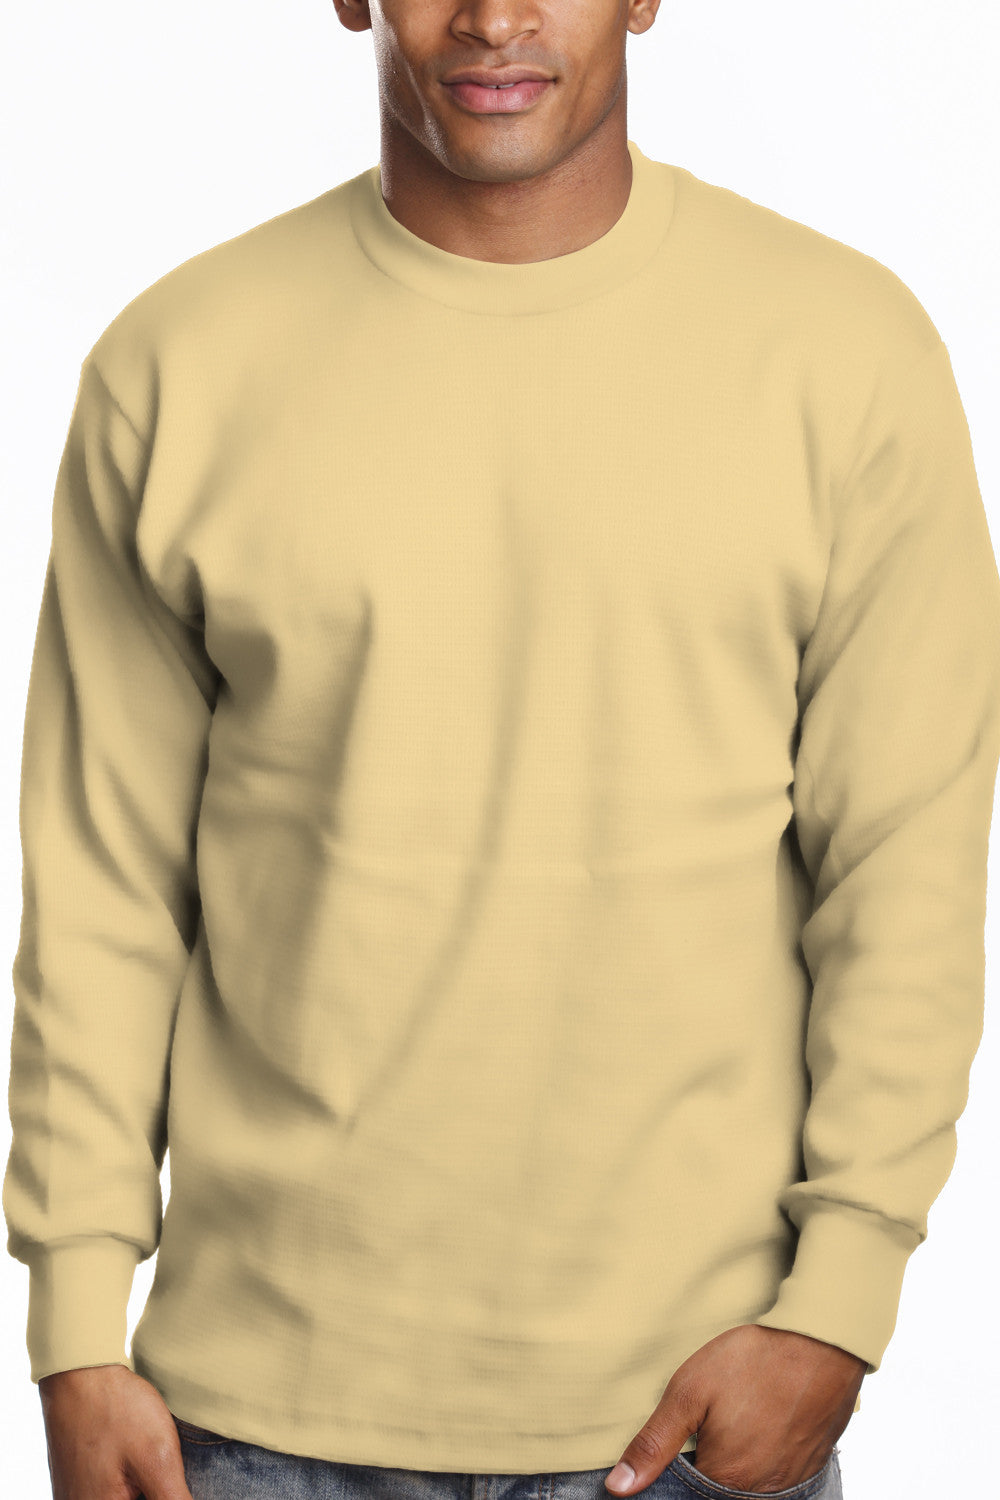 Heavy Long Sleeve Khaki Tee: Iconic long sleeve, snug round neck, 6.7oz. Lycra reinforced collar. Bright fade-resistant colors. U.S. cotton. Available Sizes: L Tall-5X tall, Colors: White, Black, Grey, more. Fabric: Solid-100% Cotton, Grey Shades-80% Cotton 20% Poly. Weight: 6.7 oz